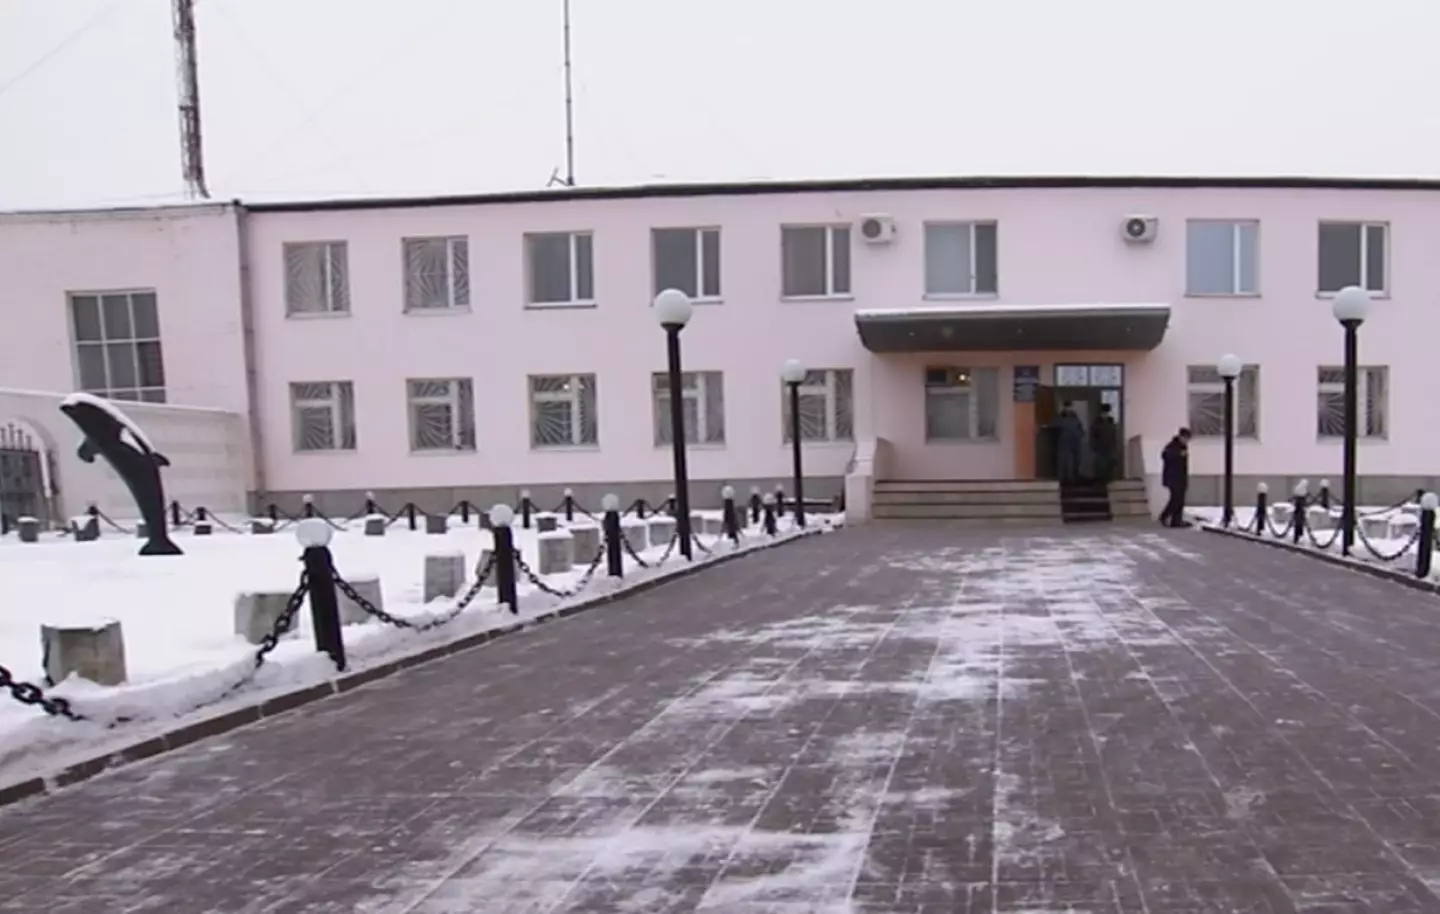 Black Dolphin prison houses 'roughly 700 of Russia's most dangerous killers'.